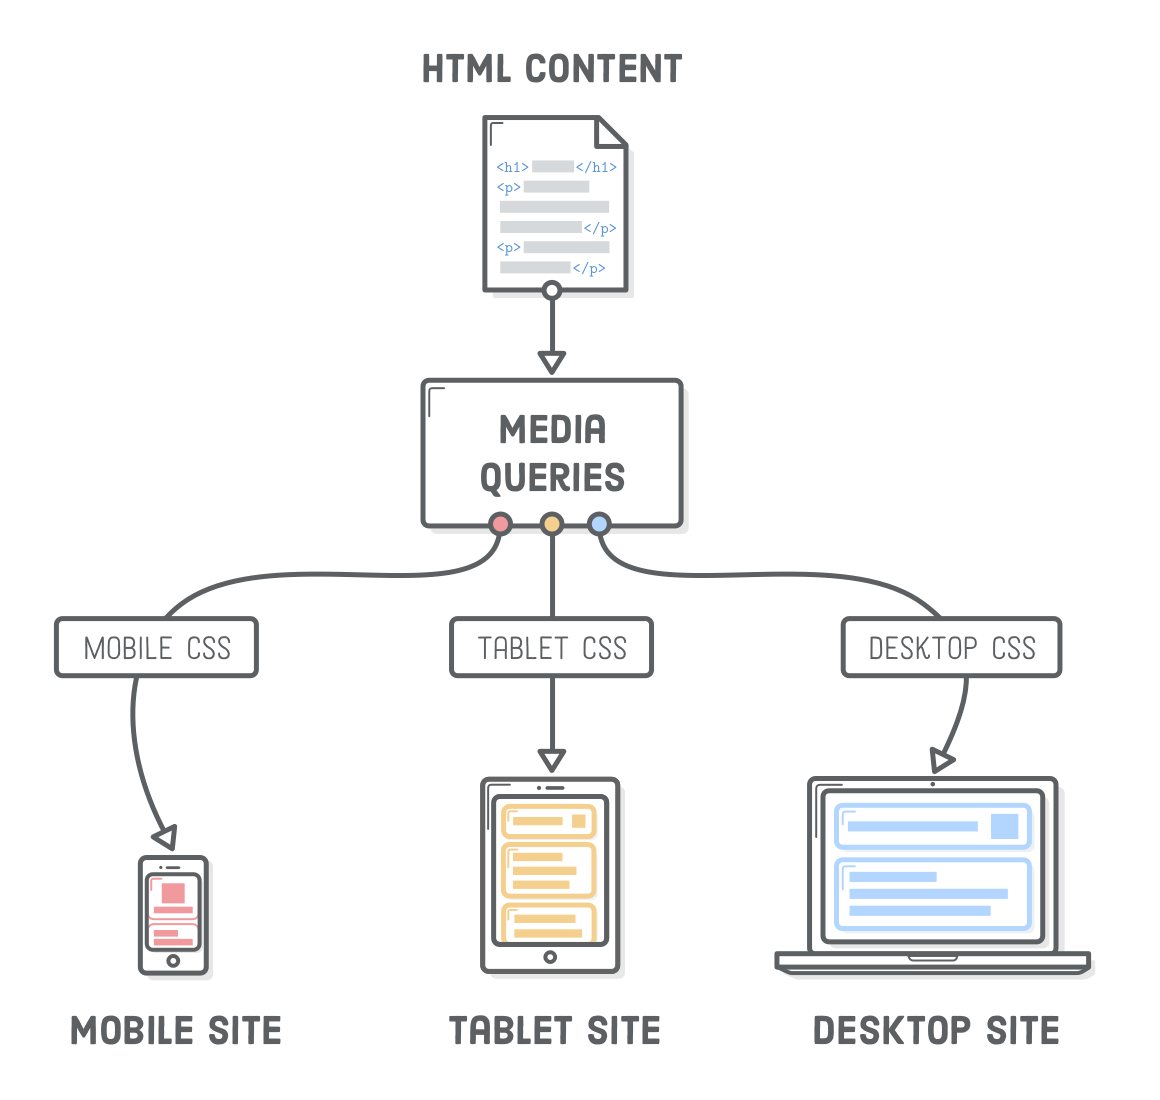 Diagram: HTML content pointing to media queries, which point to mobile, tablet, and desktop devices